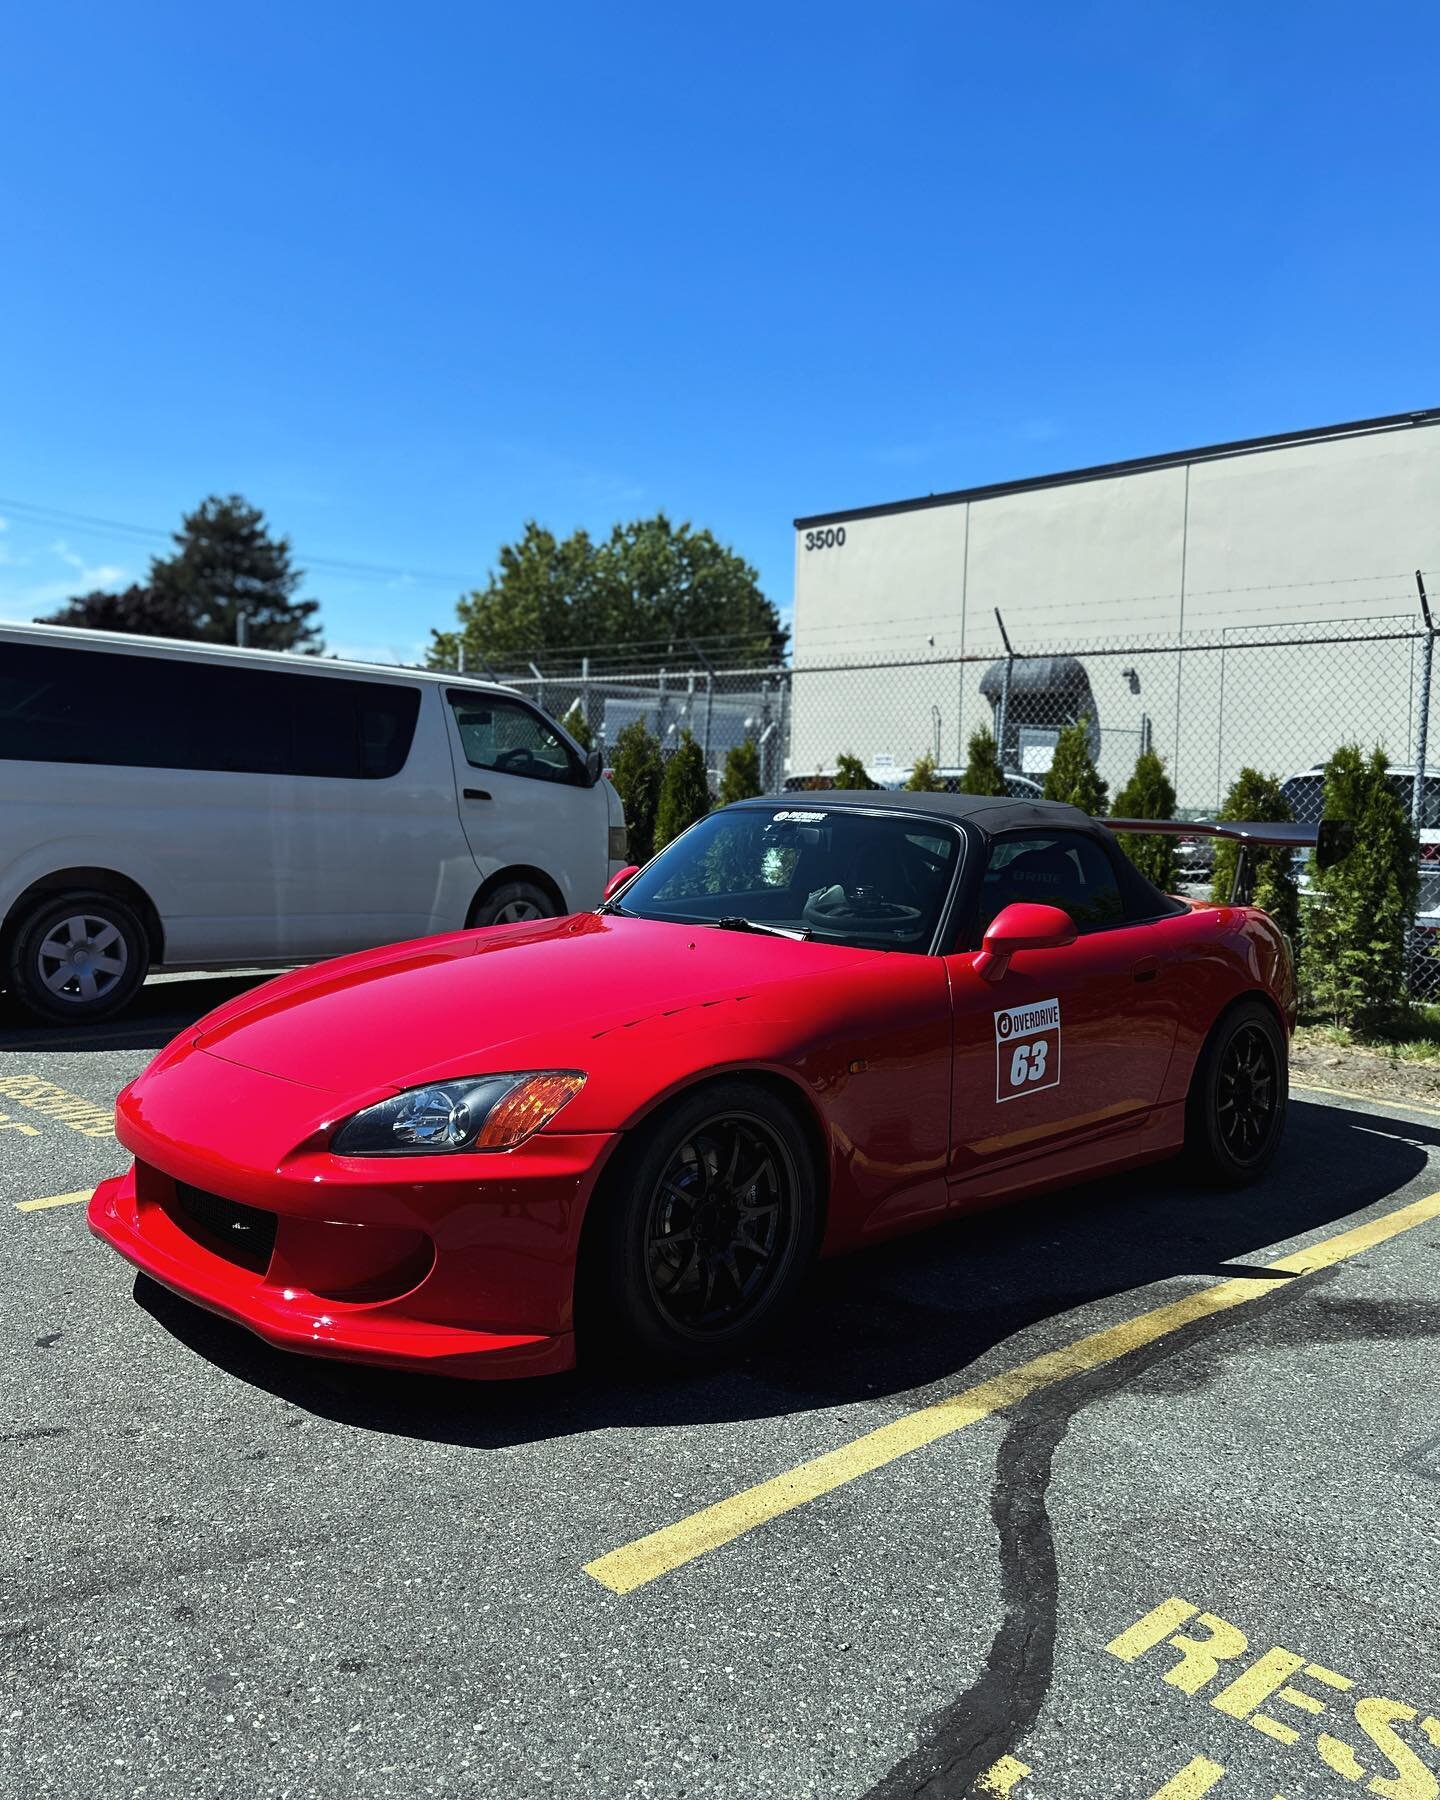 Honda S2000

Came in for our Maintenance Package ✅

Post track day washie💦🧼🏁

For inquiries or bookings

Phone: 604-404-7225
Email: Washiewashiedetailing@gmail.com
Website: Washiewashie.ca